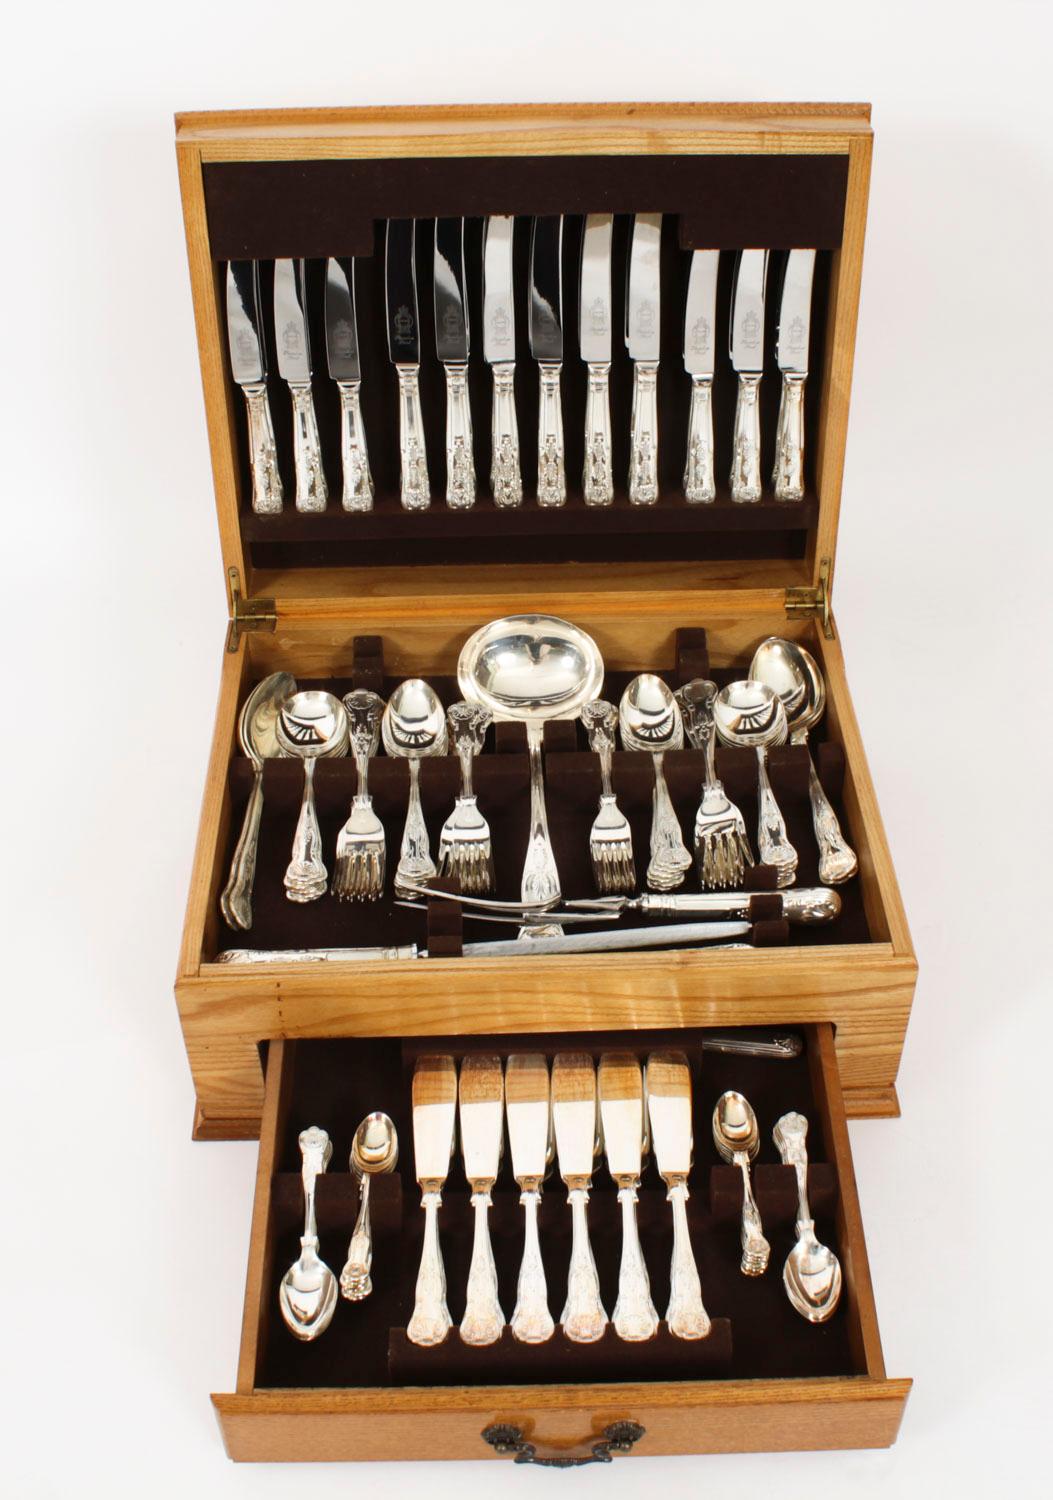 An elegant Vintage English Sheffield silverplated twelve place setting 138 piece canteen of cutlery marked Sheffield EPNS, late 20th Century in date.

This impressive set includes a beautiful blond oak case with brown felt lining, the complete of